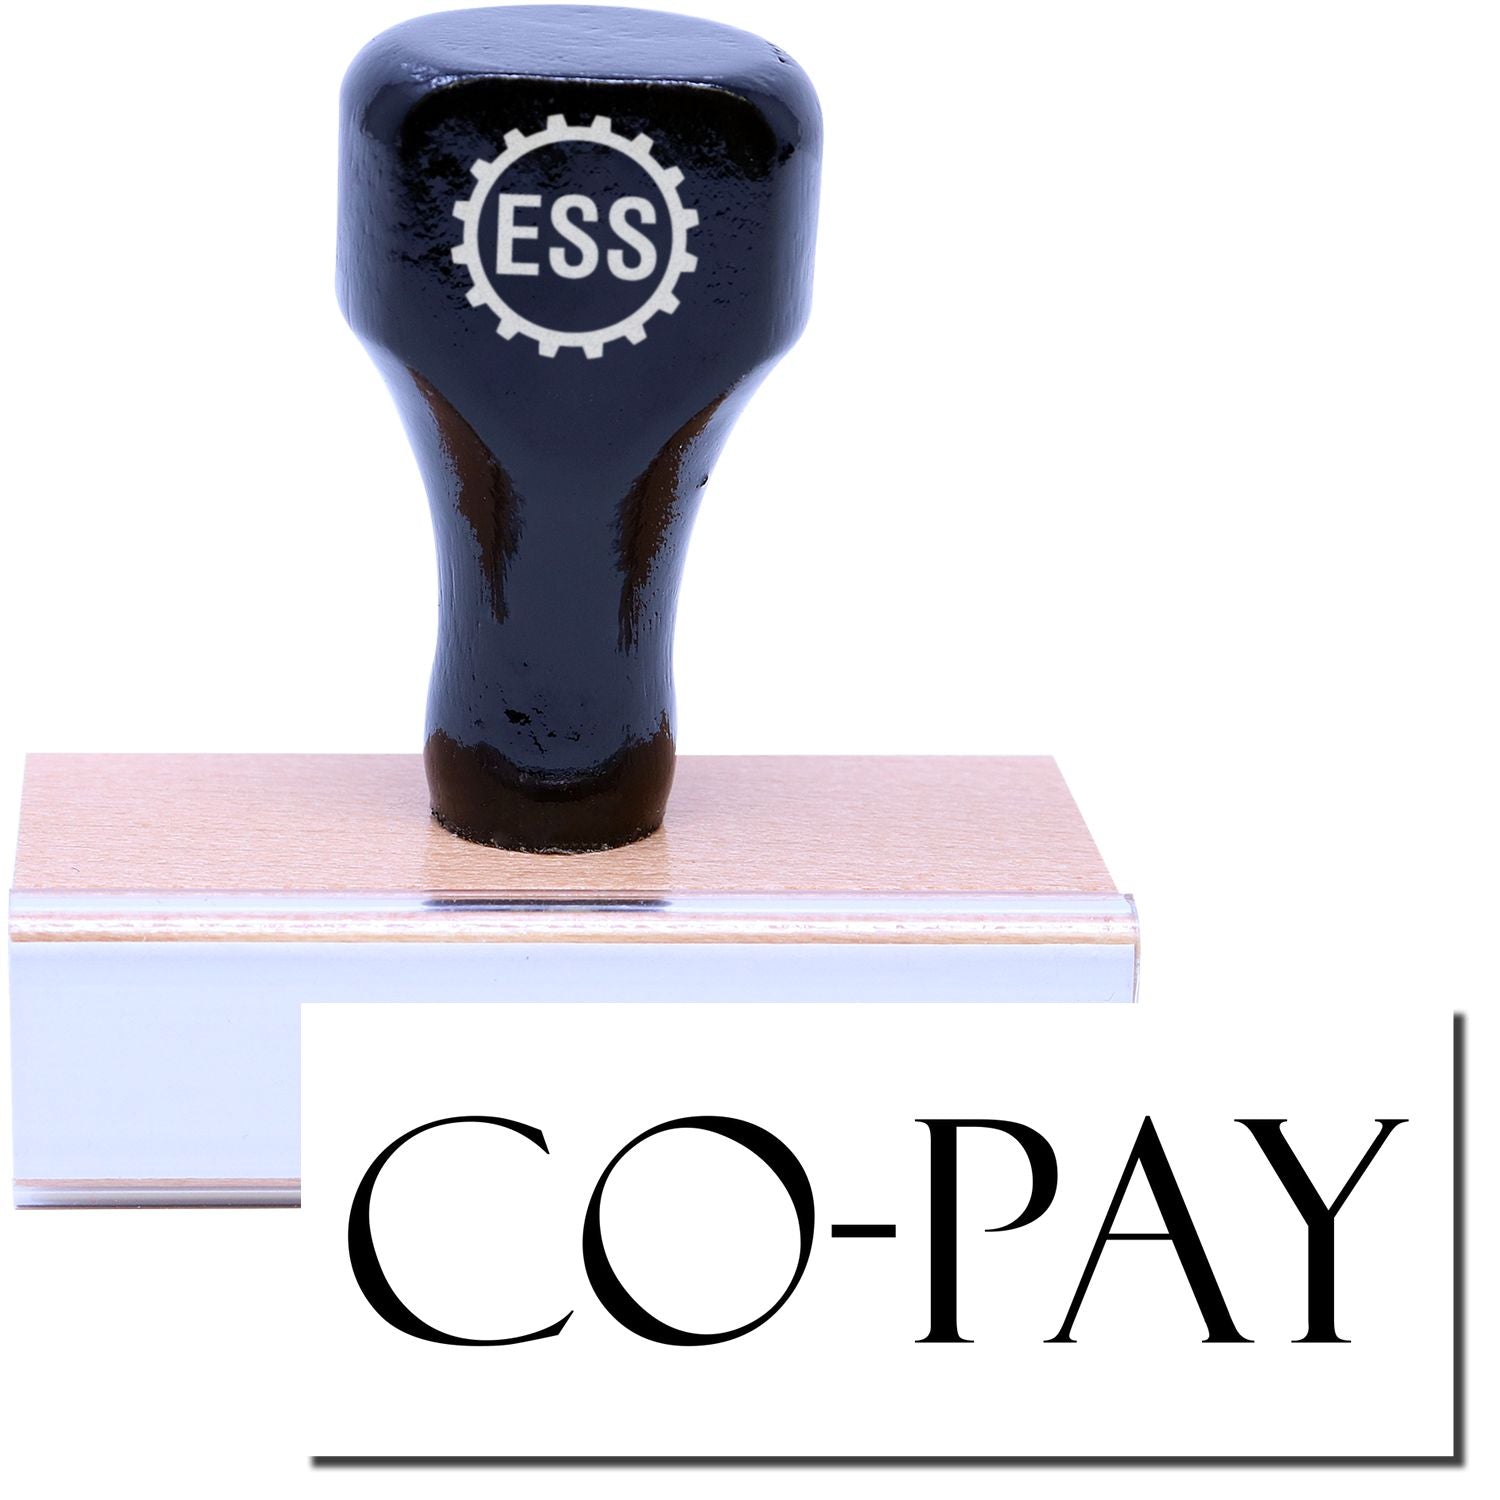 A stock office medical rubber stamp with a stamped image showing how the text "CO-PAY" is displayed after stamping.